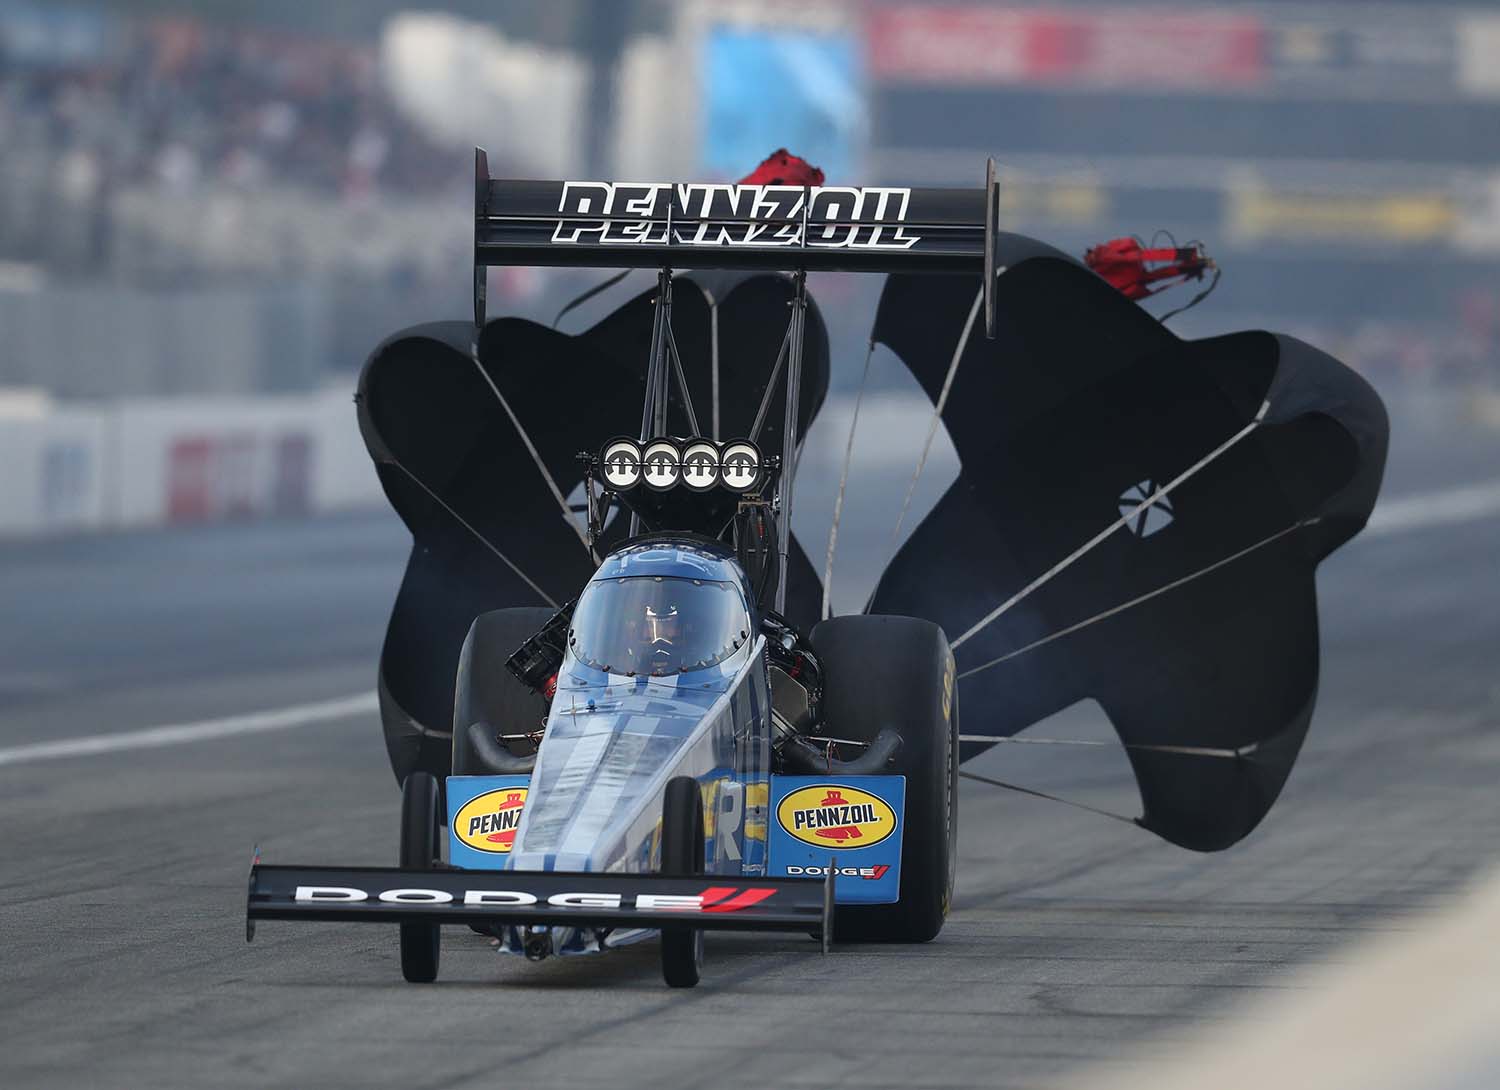 Leah will start from the No. 2 spot on the Top Fuel ladder as she seeks to maintain her ‘top five’ ranking